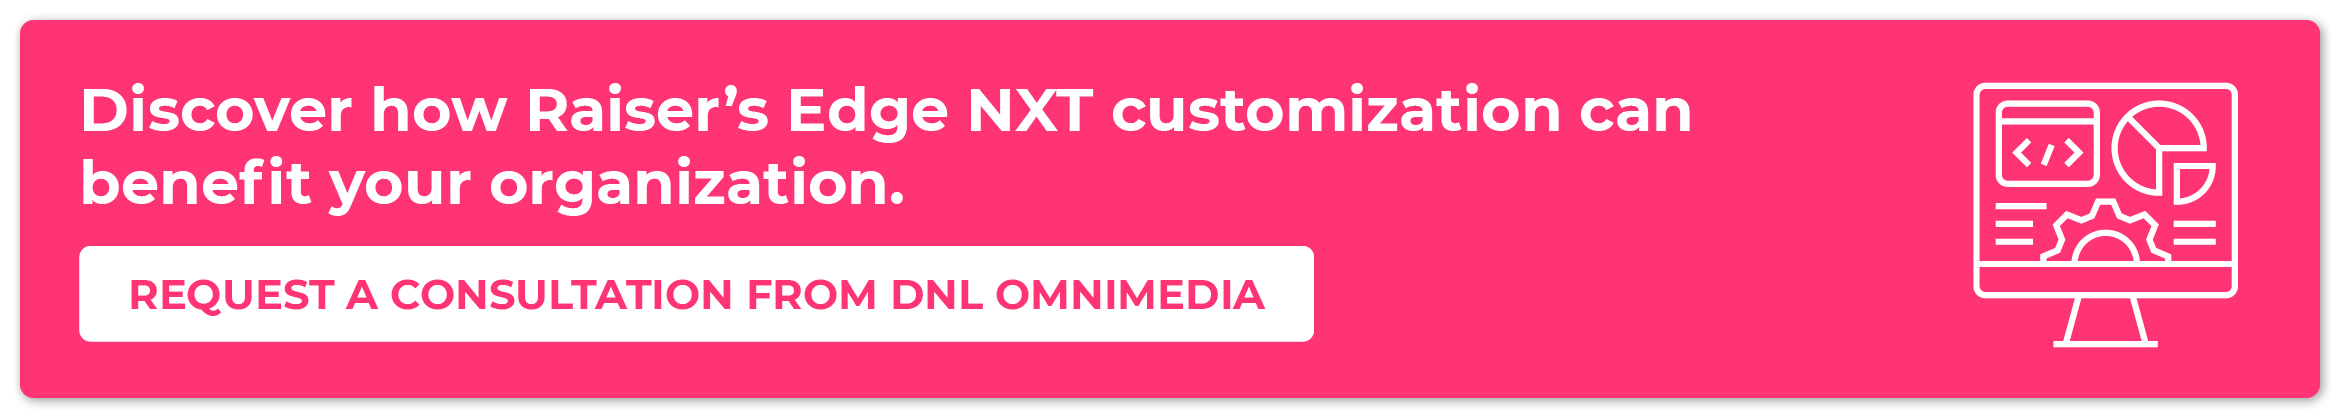 Click to request a DNL OmniMedia consultation to learn how customizing RE NXT can benefit your organization.